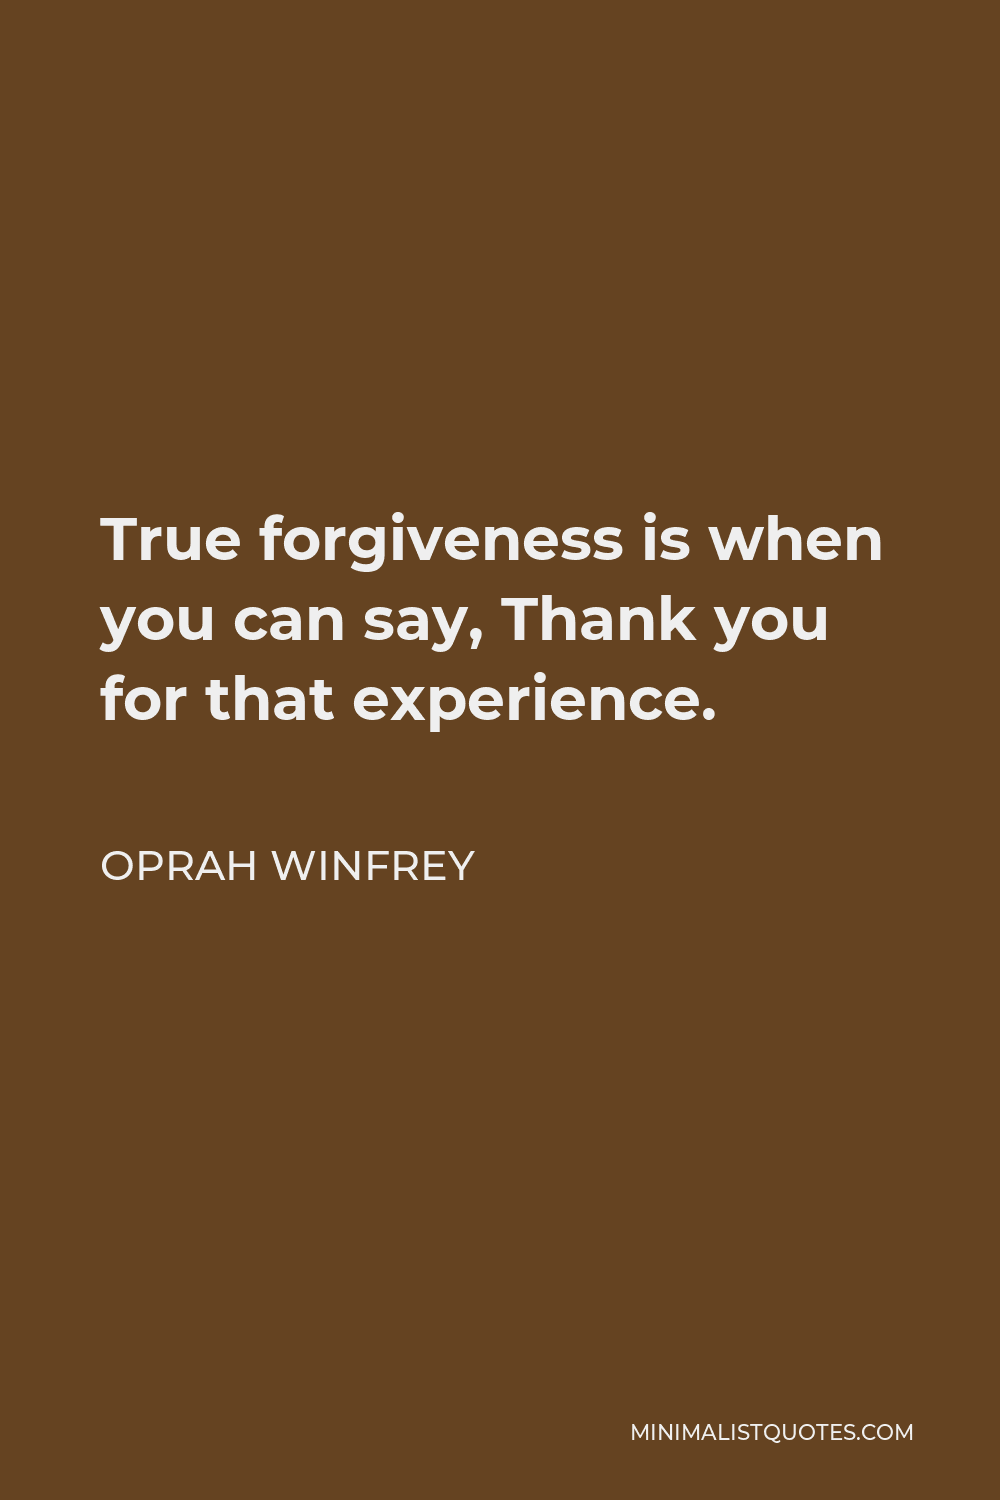 Oprah Winfrey Quote - True forgiveness is when you can say, Thank you for that experience.